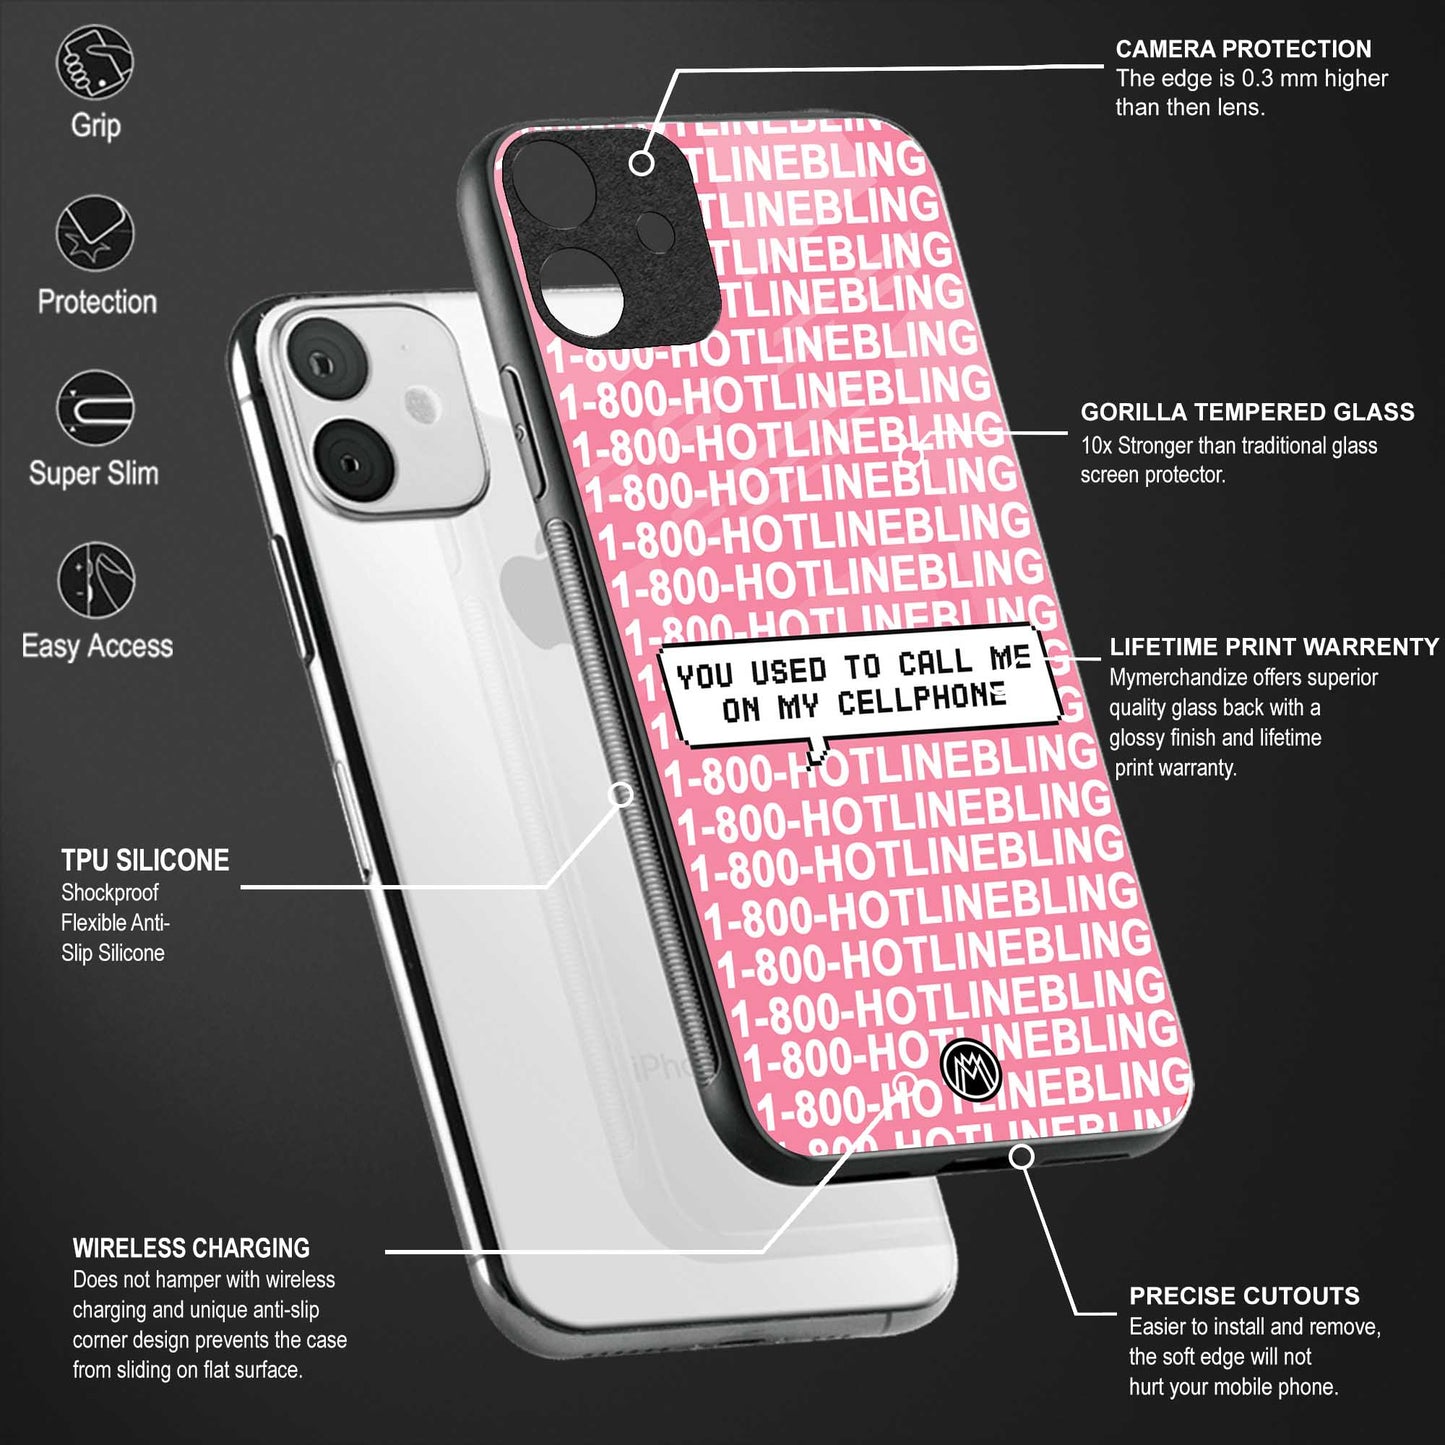 1800 hotline bling phone cover for iphone 6 